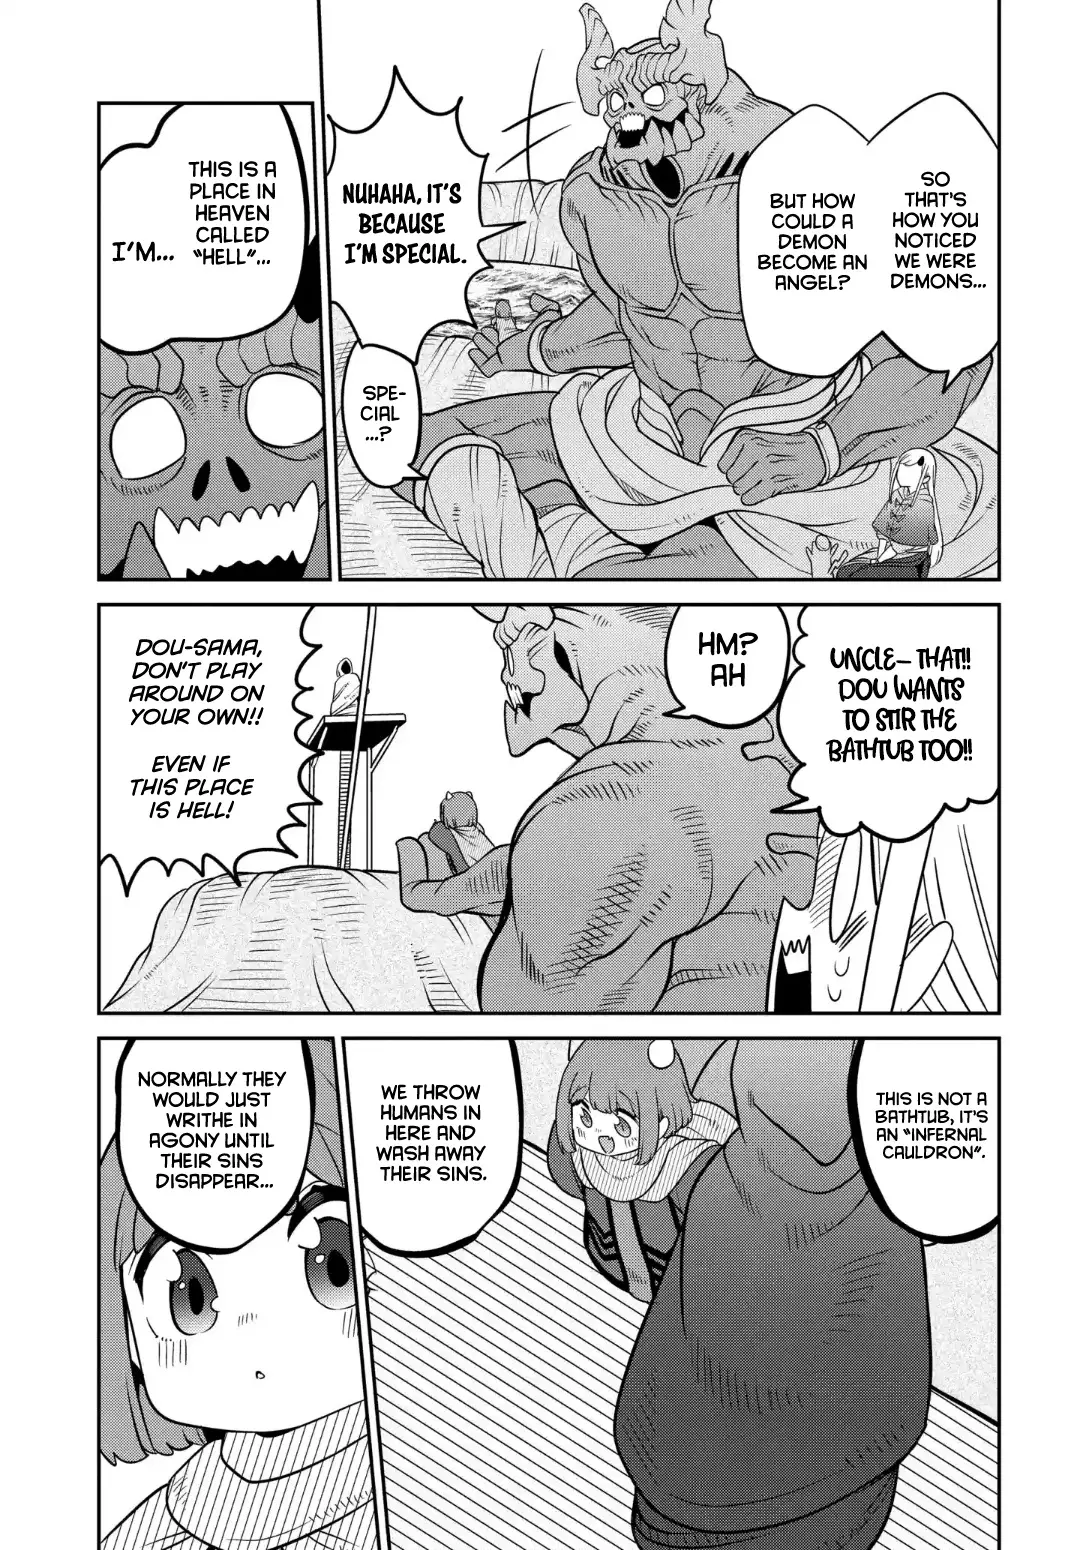 The Demon King’S Daughter Is Too Kind - 28 page 6-5213bd2b